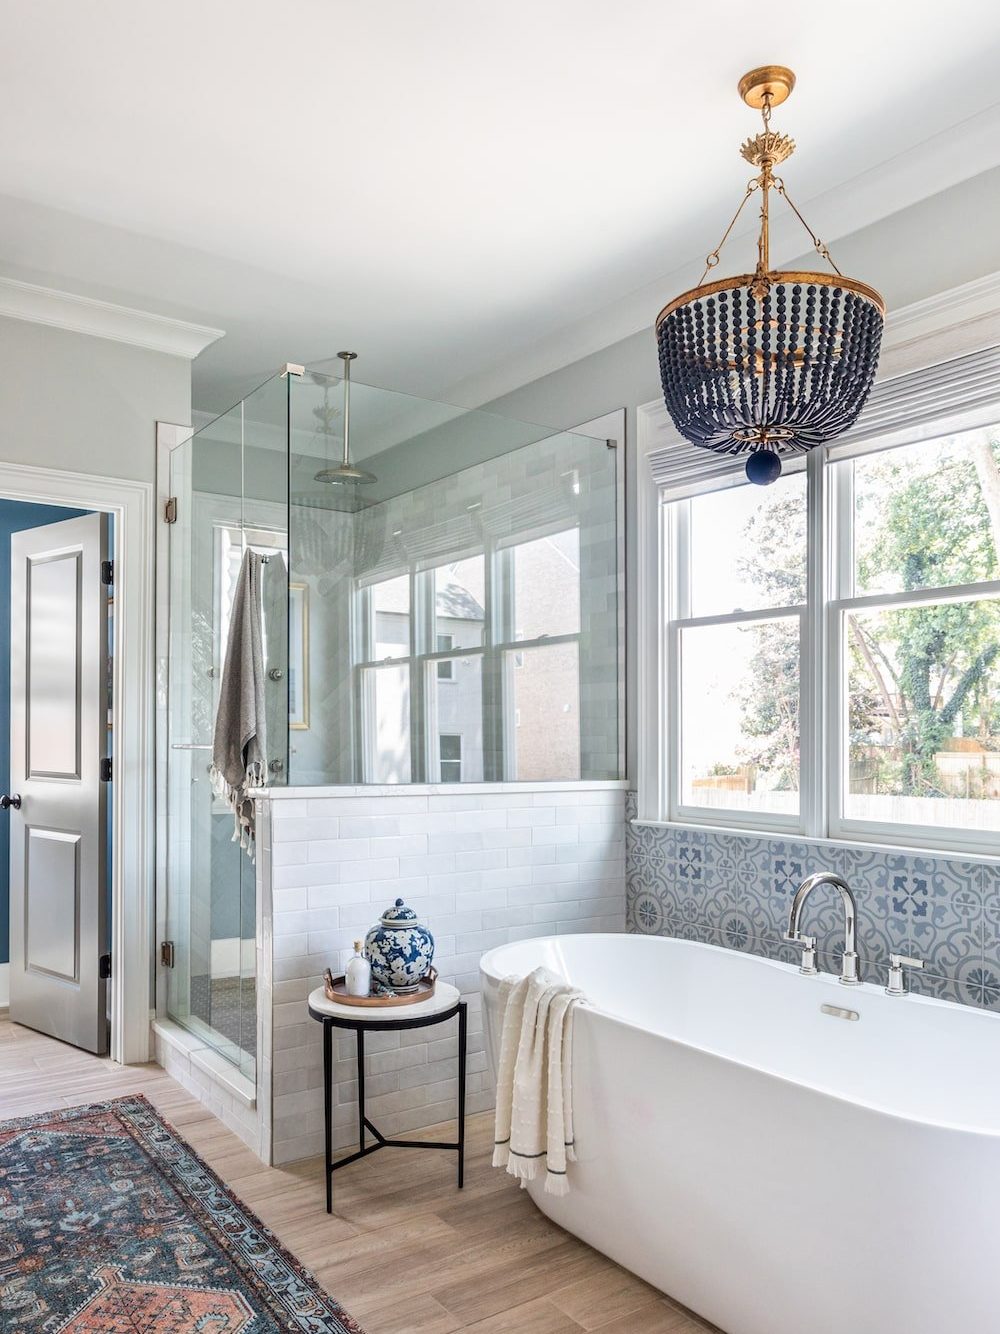 An image of a Georgia bathroom, a great example of Modern Southern Style. 